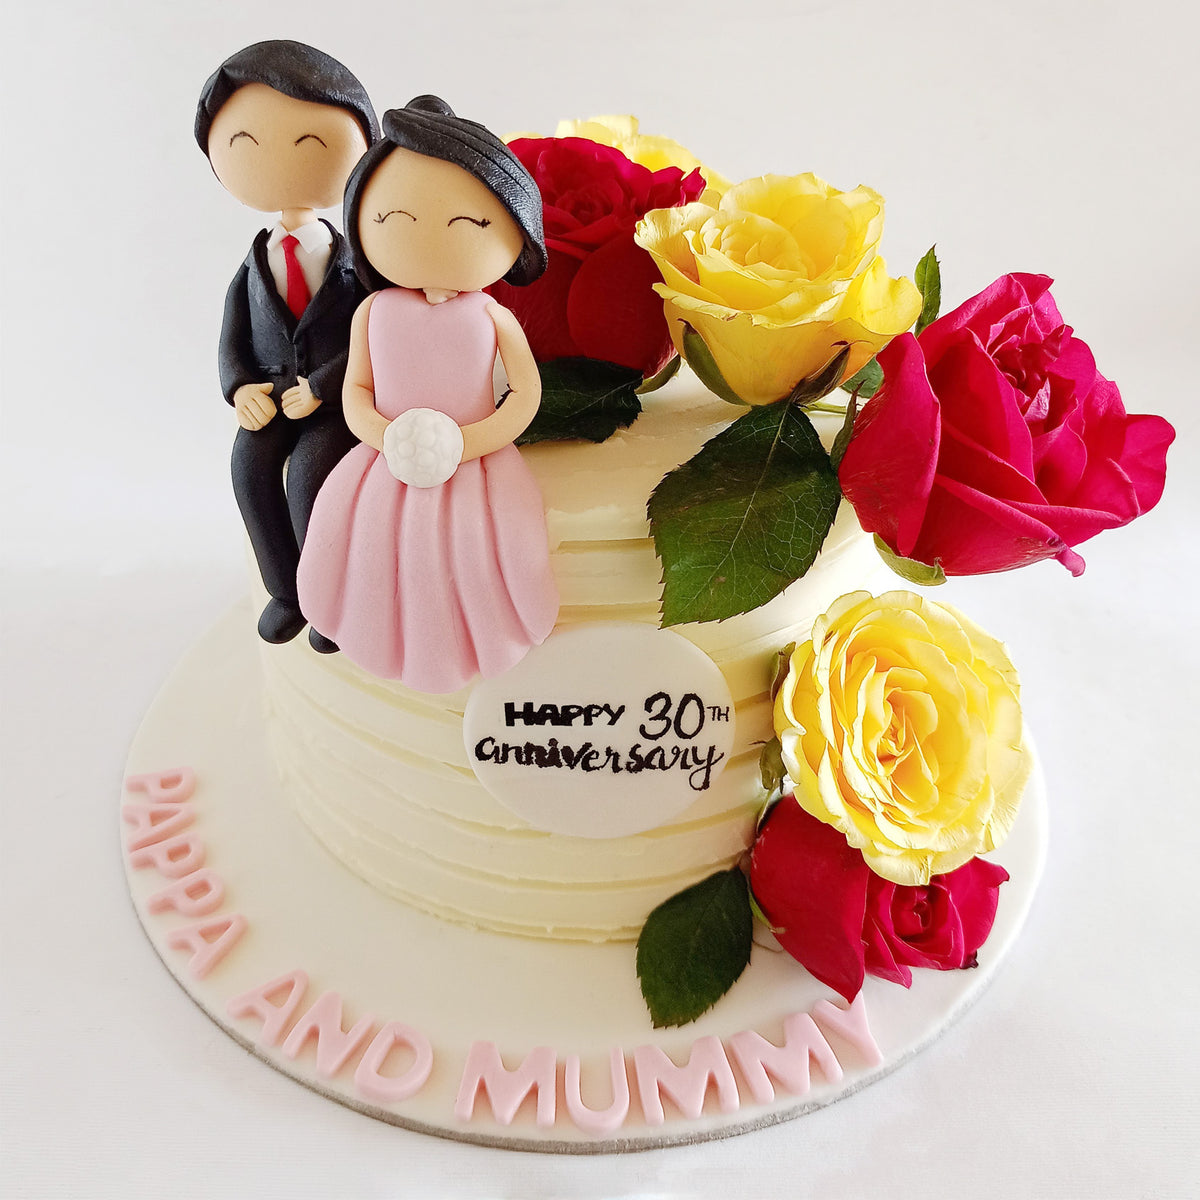 11 Mouth-Watering Anniversary Cakes for Couples - FNP Singapore